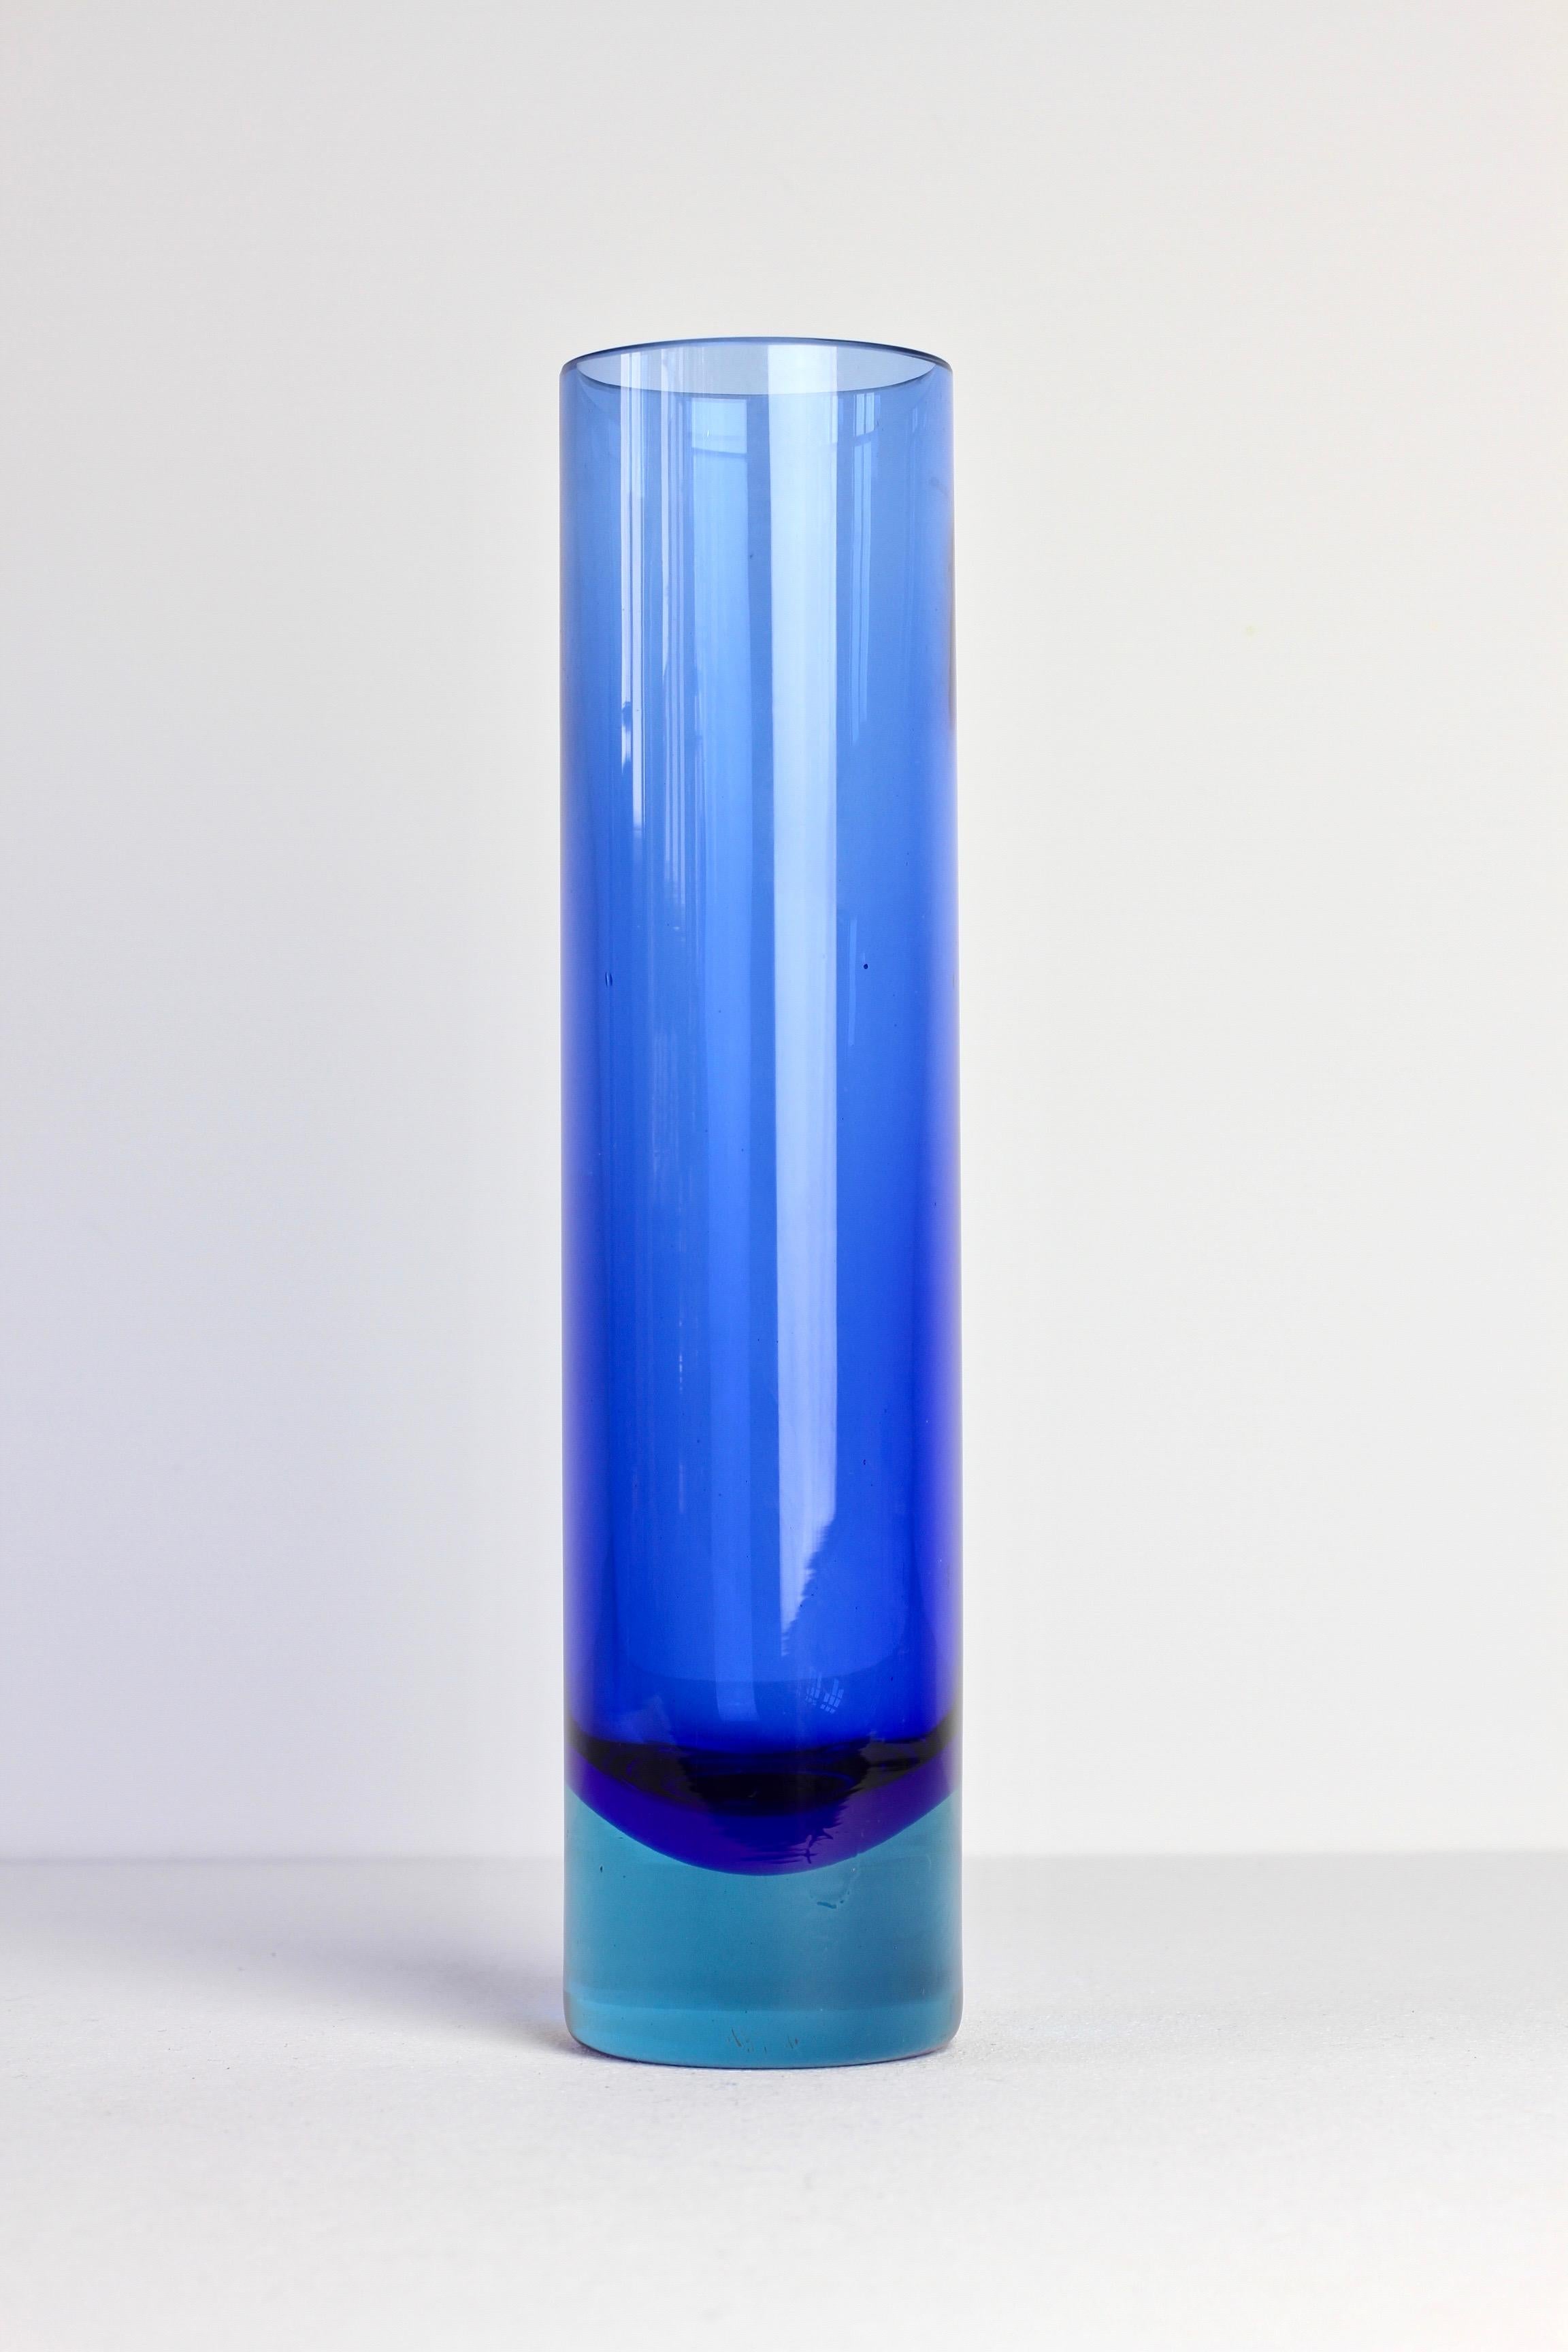 Flavio Poli style Murano glass vase. An absolutely lovely color combination of light blue over sapphire blue 'Sommerso' or 'Submerged' glass technique.

The exact maker and production date is not yet known to us but, we believe, this vase was made